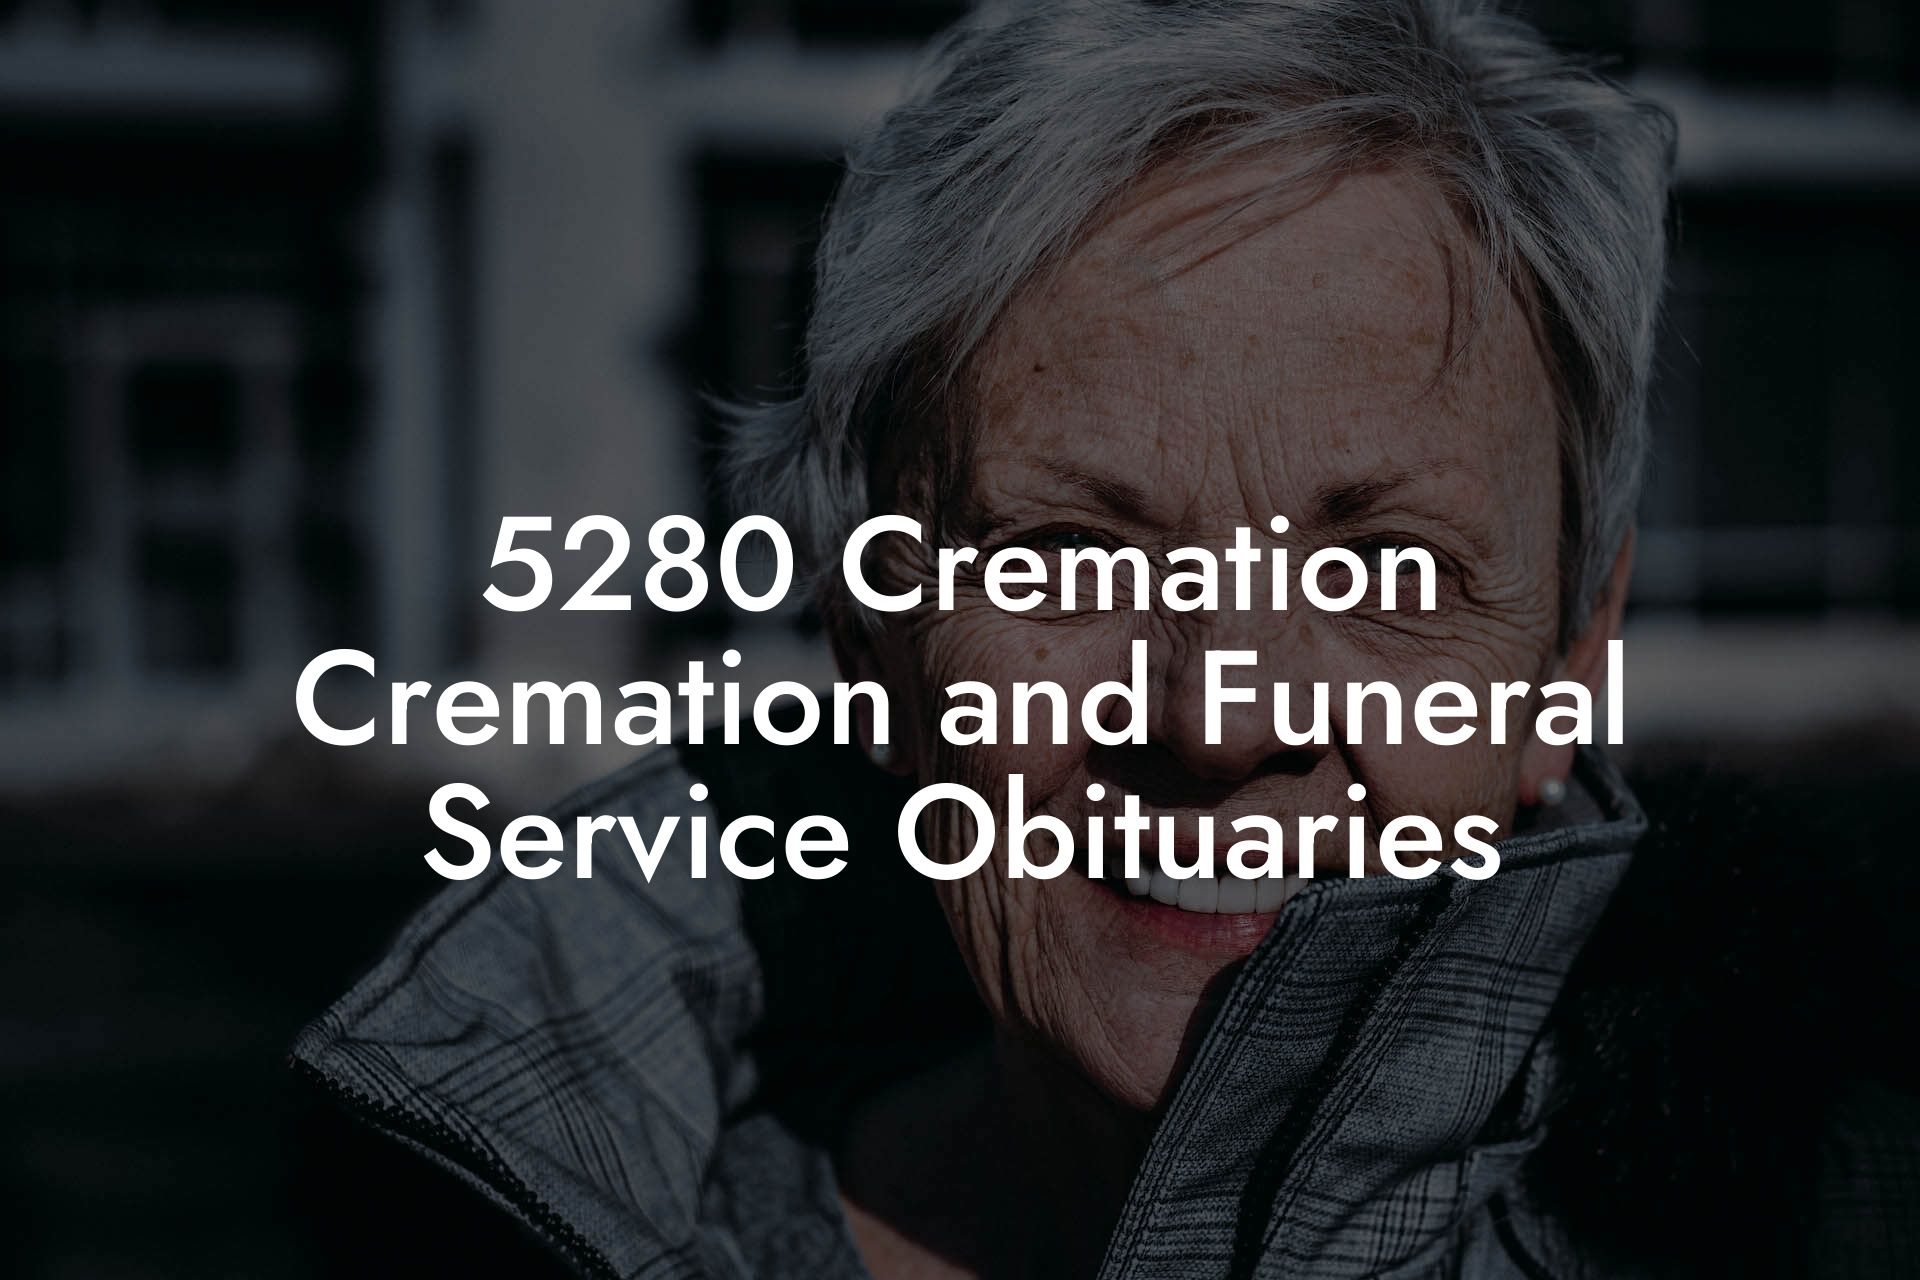 5280 Cremation Cremation and Funeral Service Obituaries